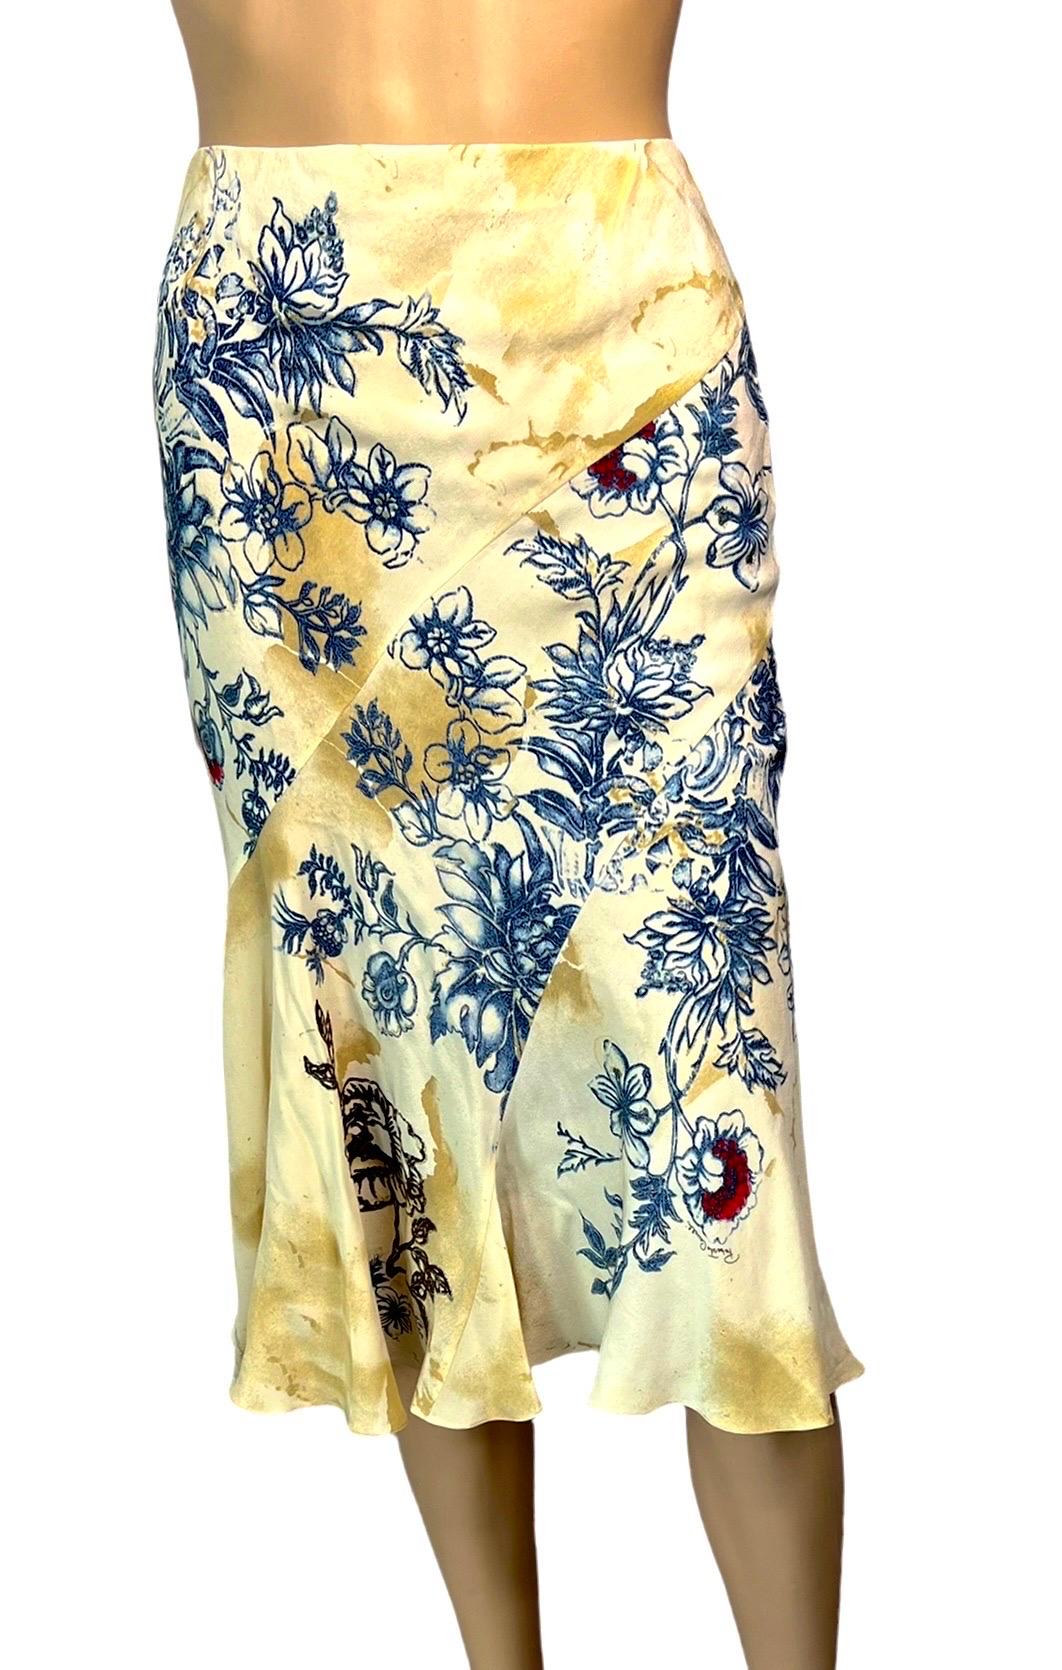 Roberto Cavalli S/S 2003 Runway Tattoo Print Silk Midi Skirt

Please note size tag has been removed. Also, there is a slight adjustment at the waist over the designer tag (please see last photo).
